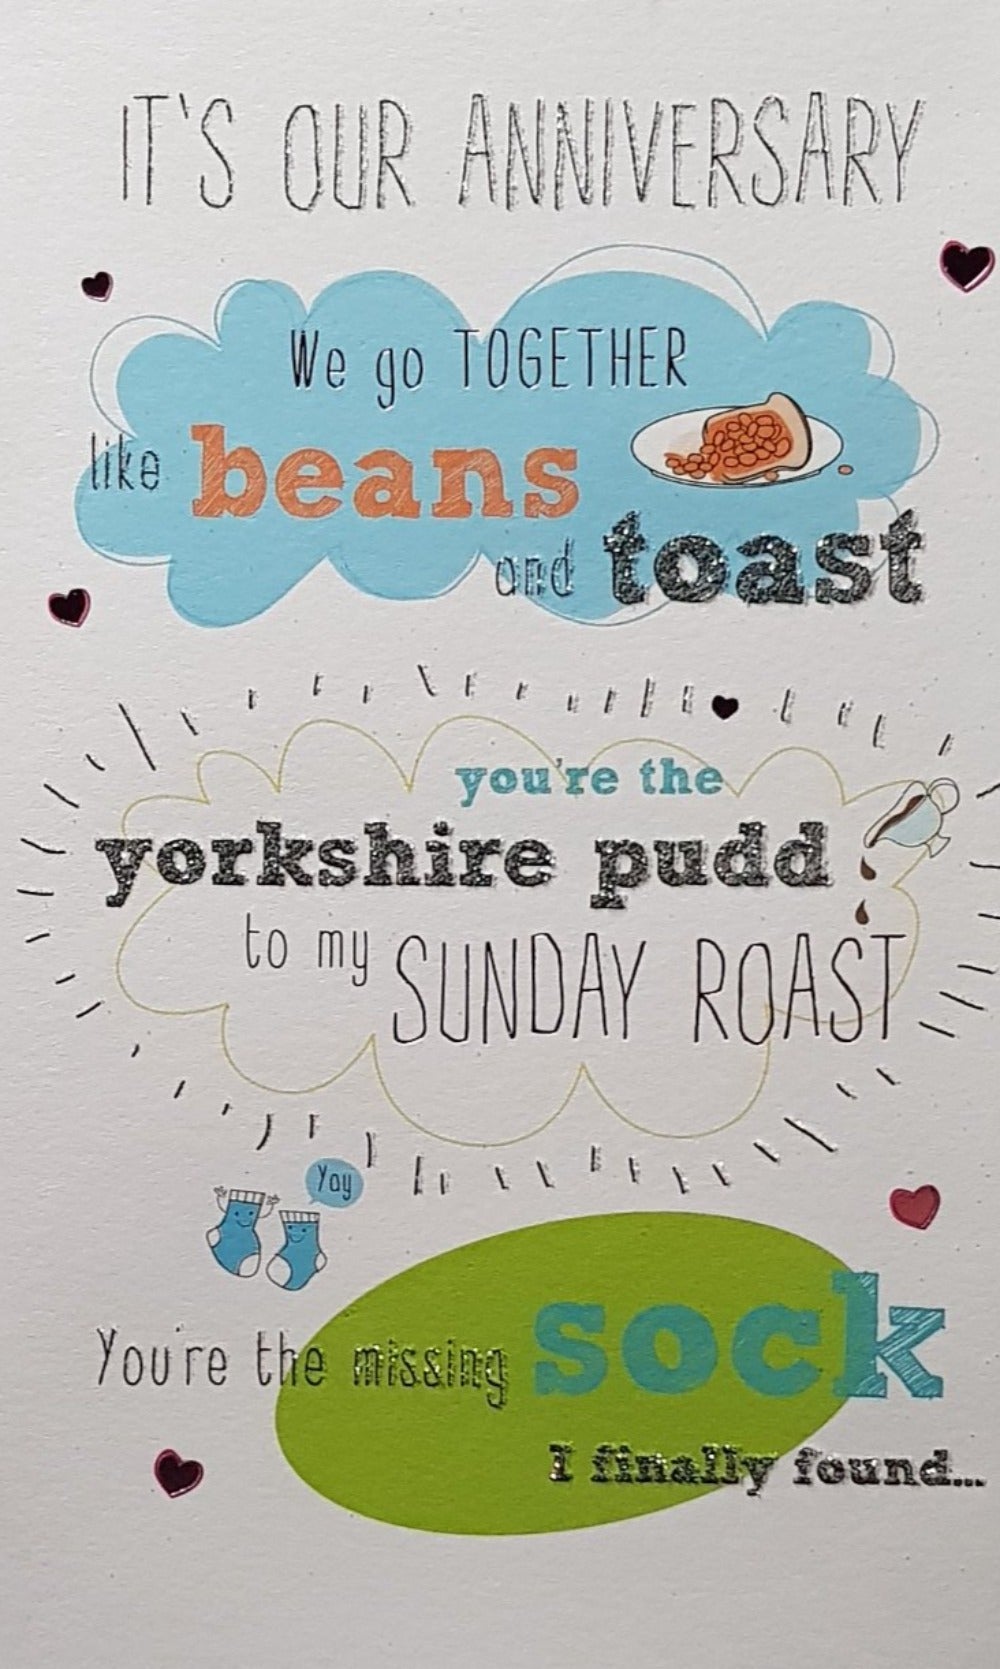 Anniversary Card - Our Anniversary / Like Beans And Toast (Humour)